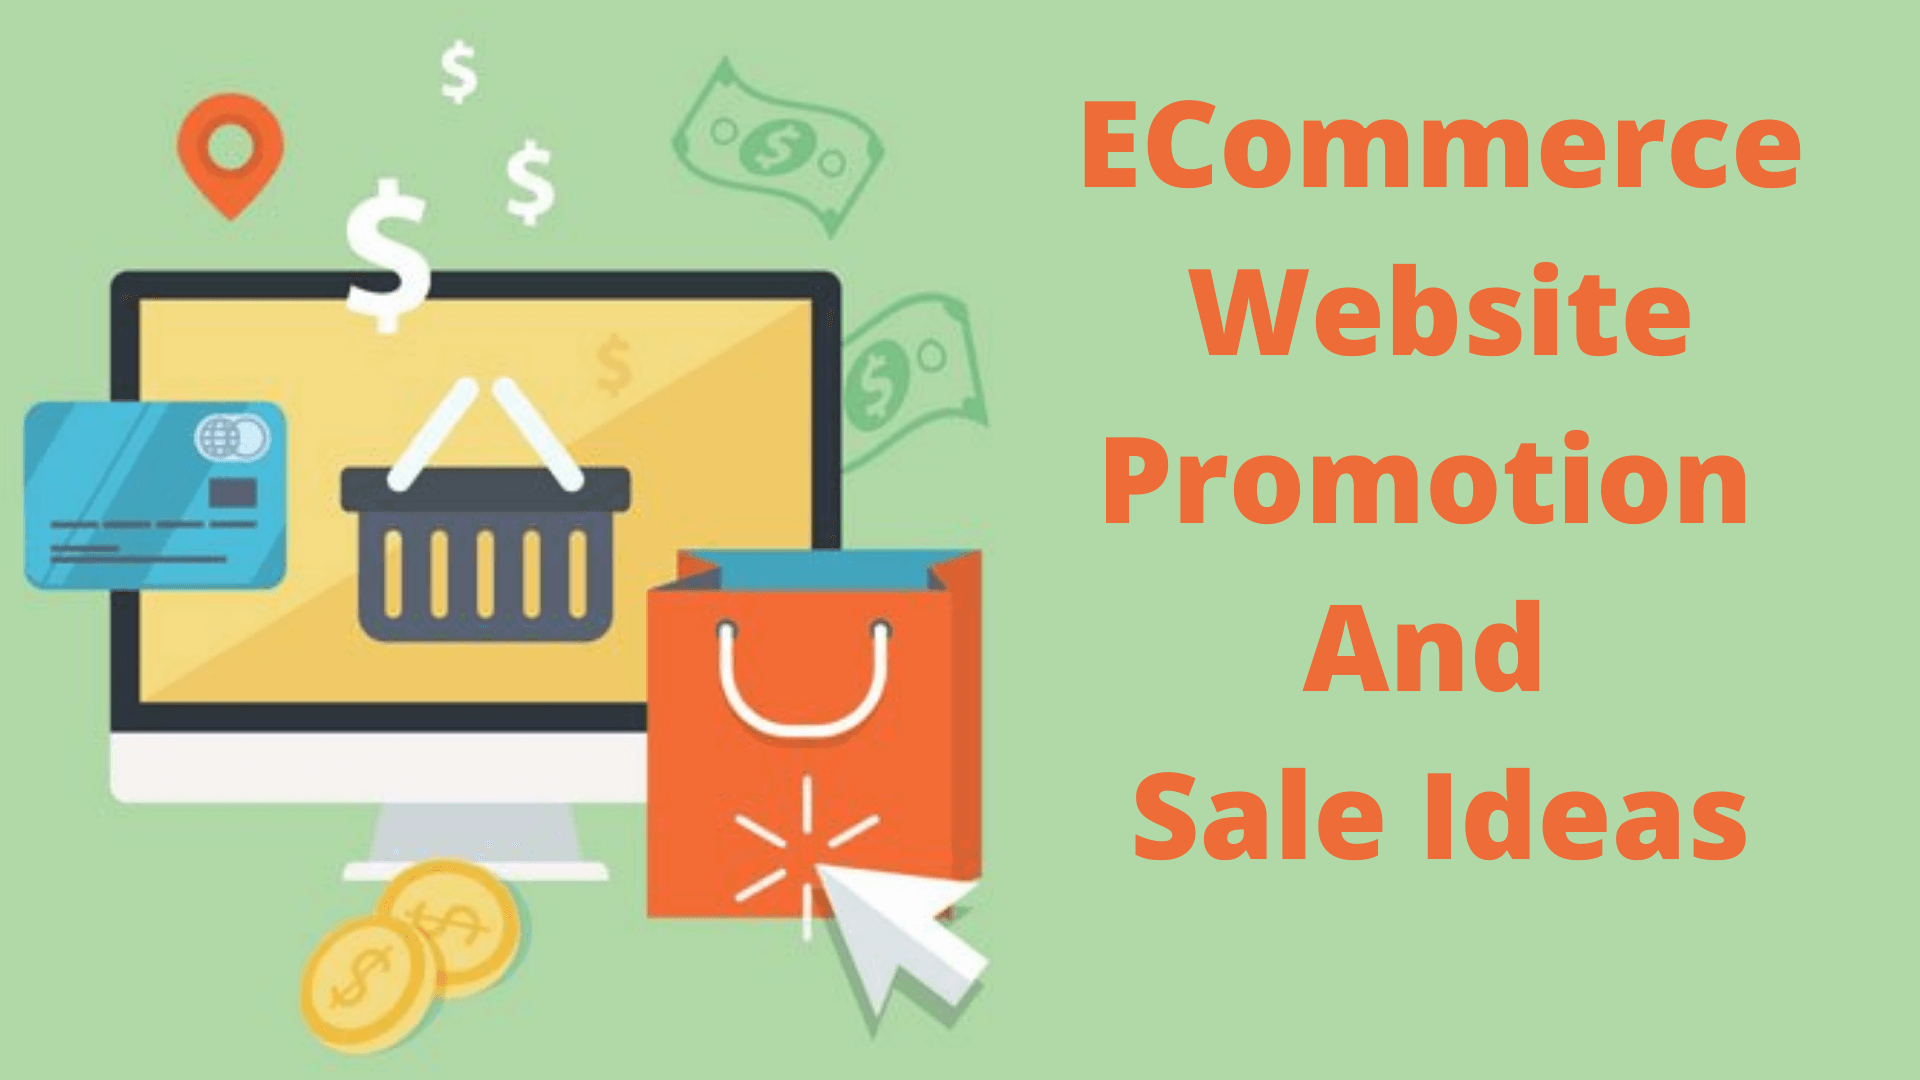 ECommerce Website Promotion And Sale Ideas (2) (1)